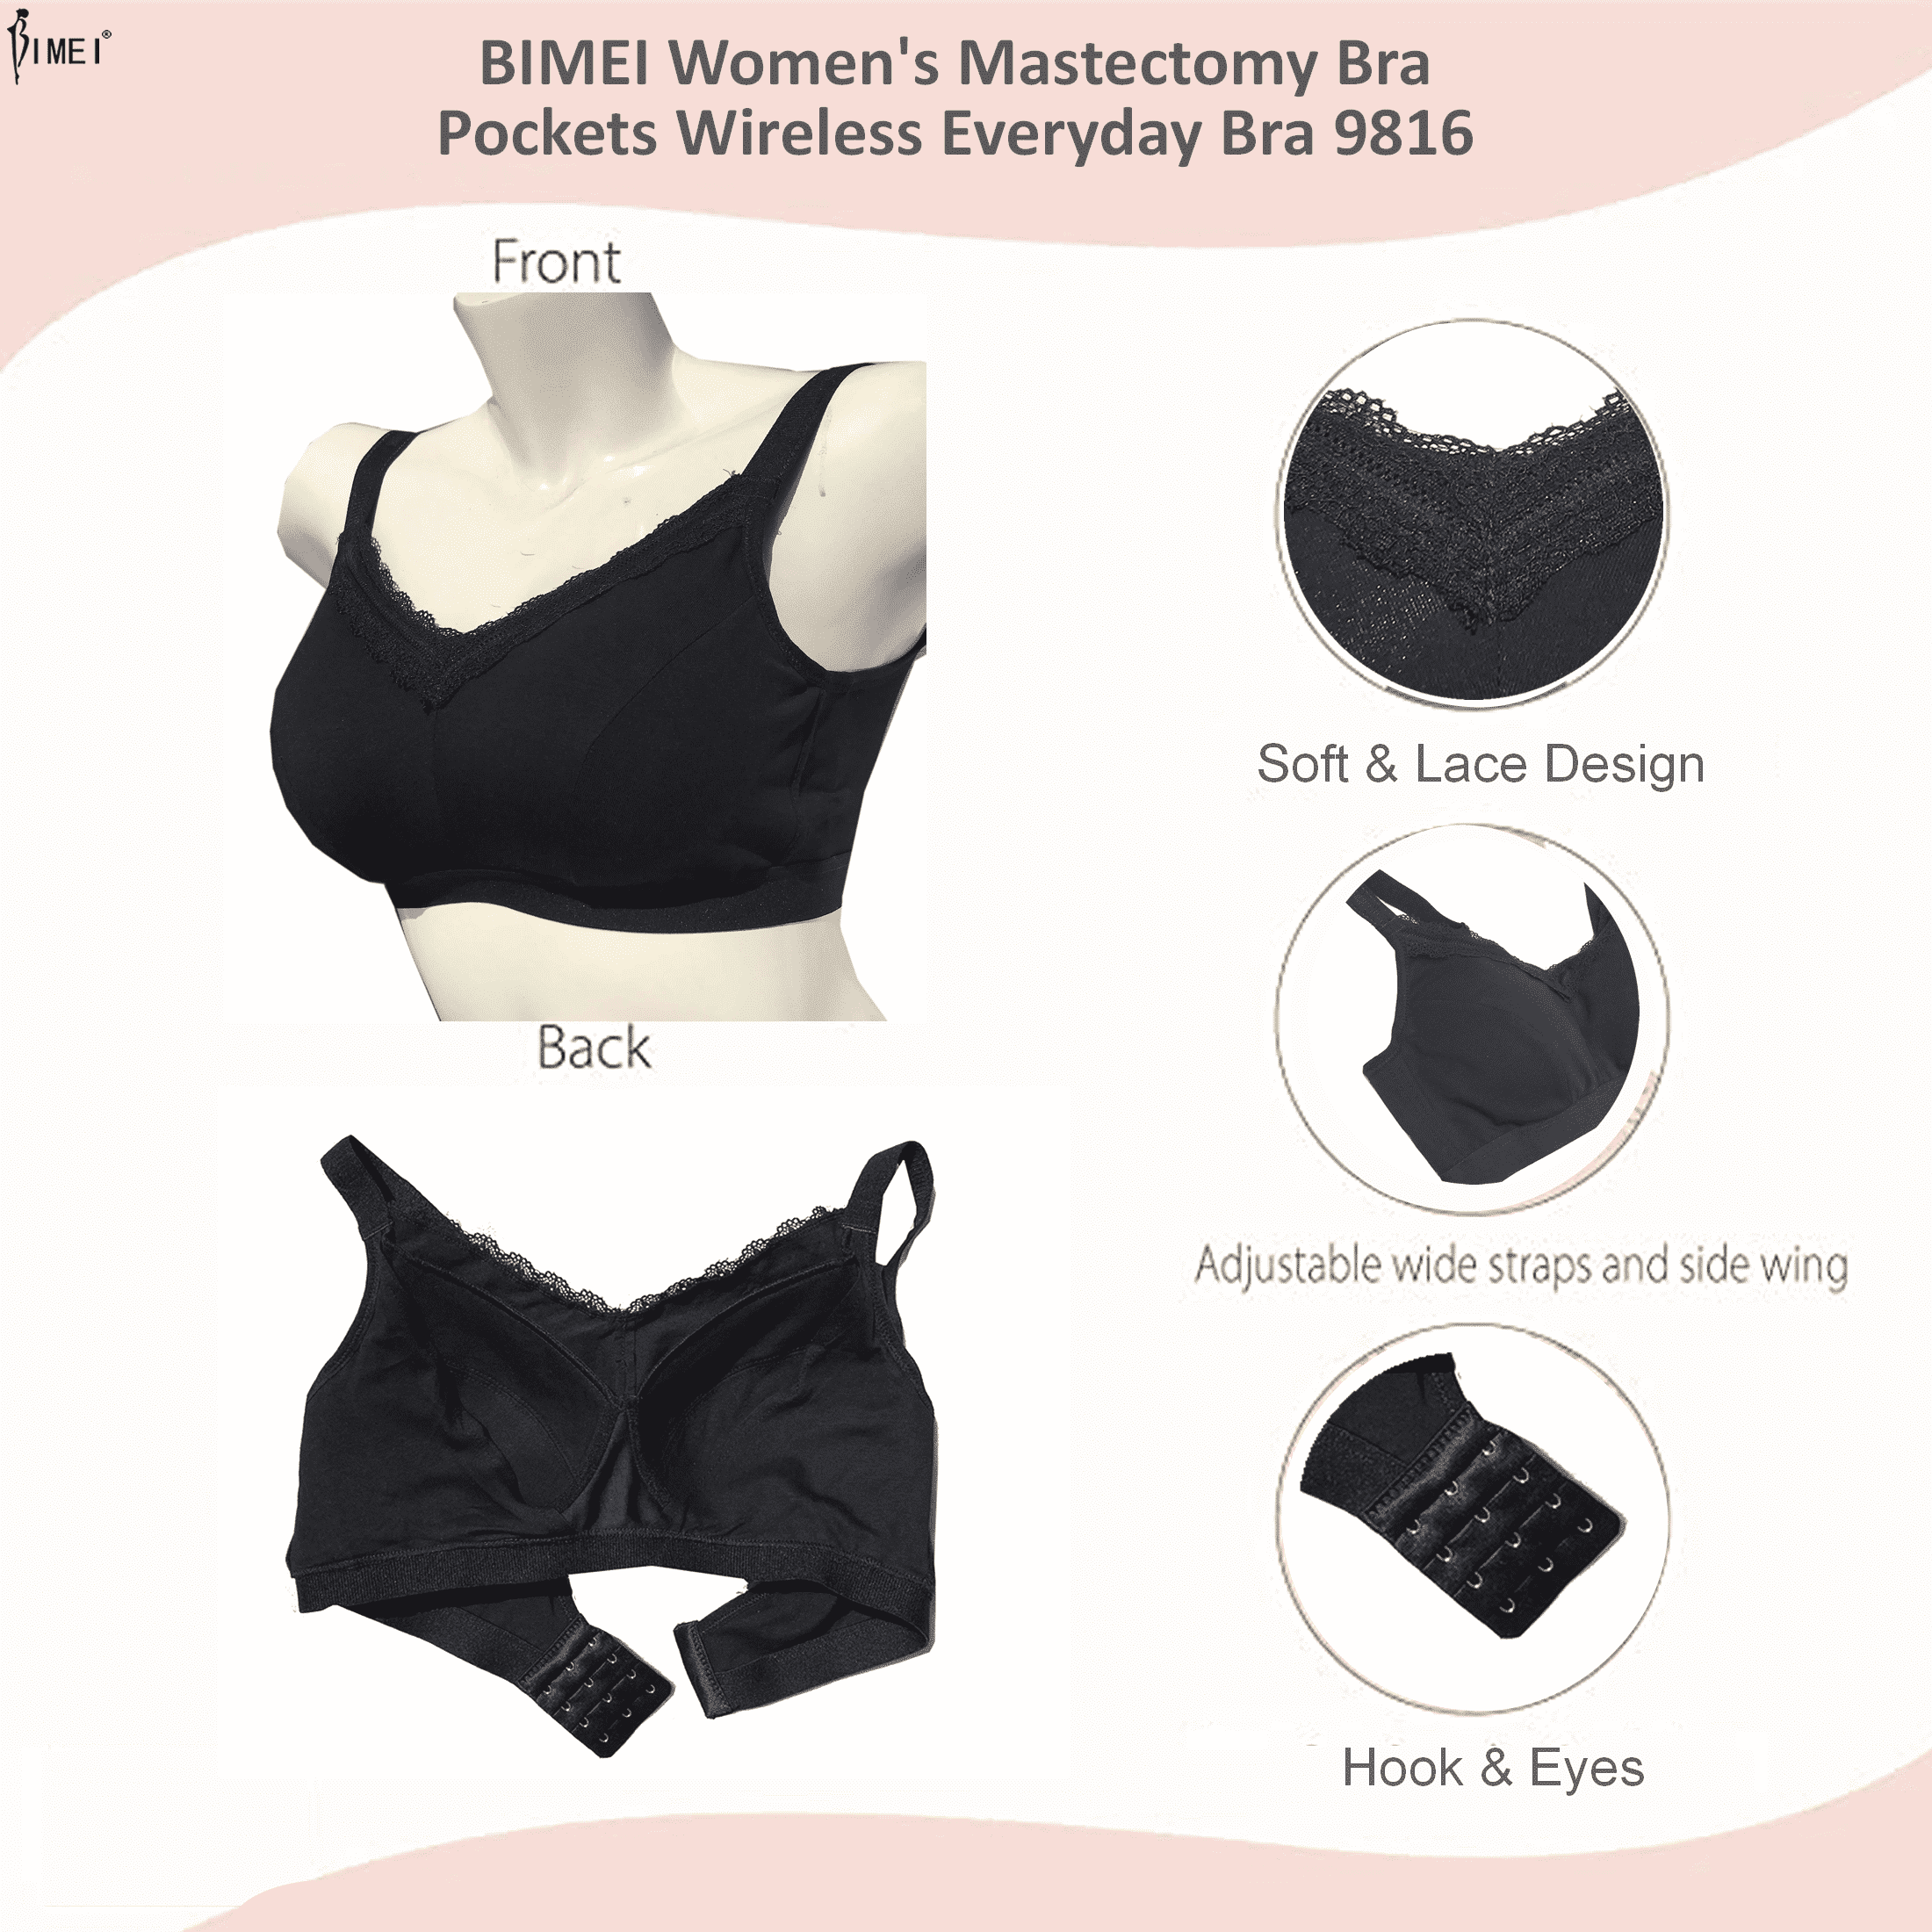 BIMEI Women's Mastectomy Bra Molded-Cup Post Surgery for Silicone Breast  Prosthesis with Pockets Everyday Bra 9816,Black,38B 